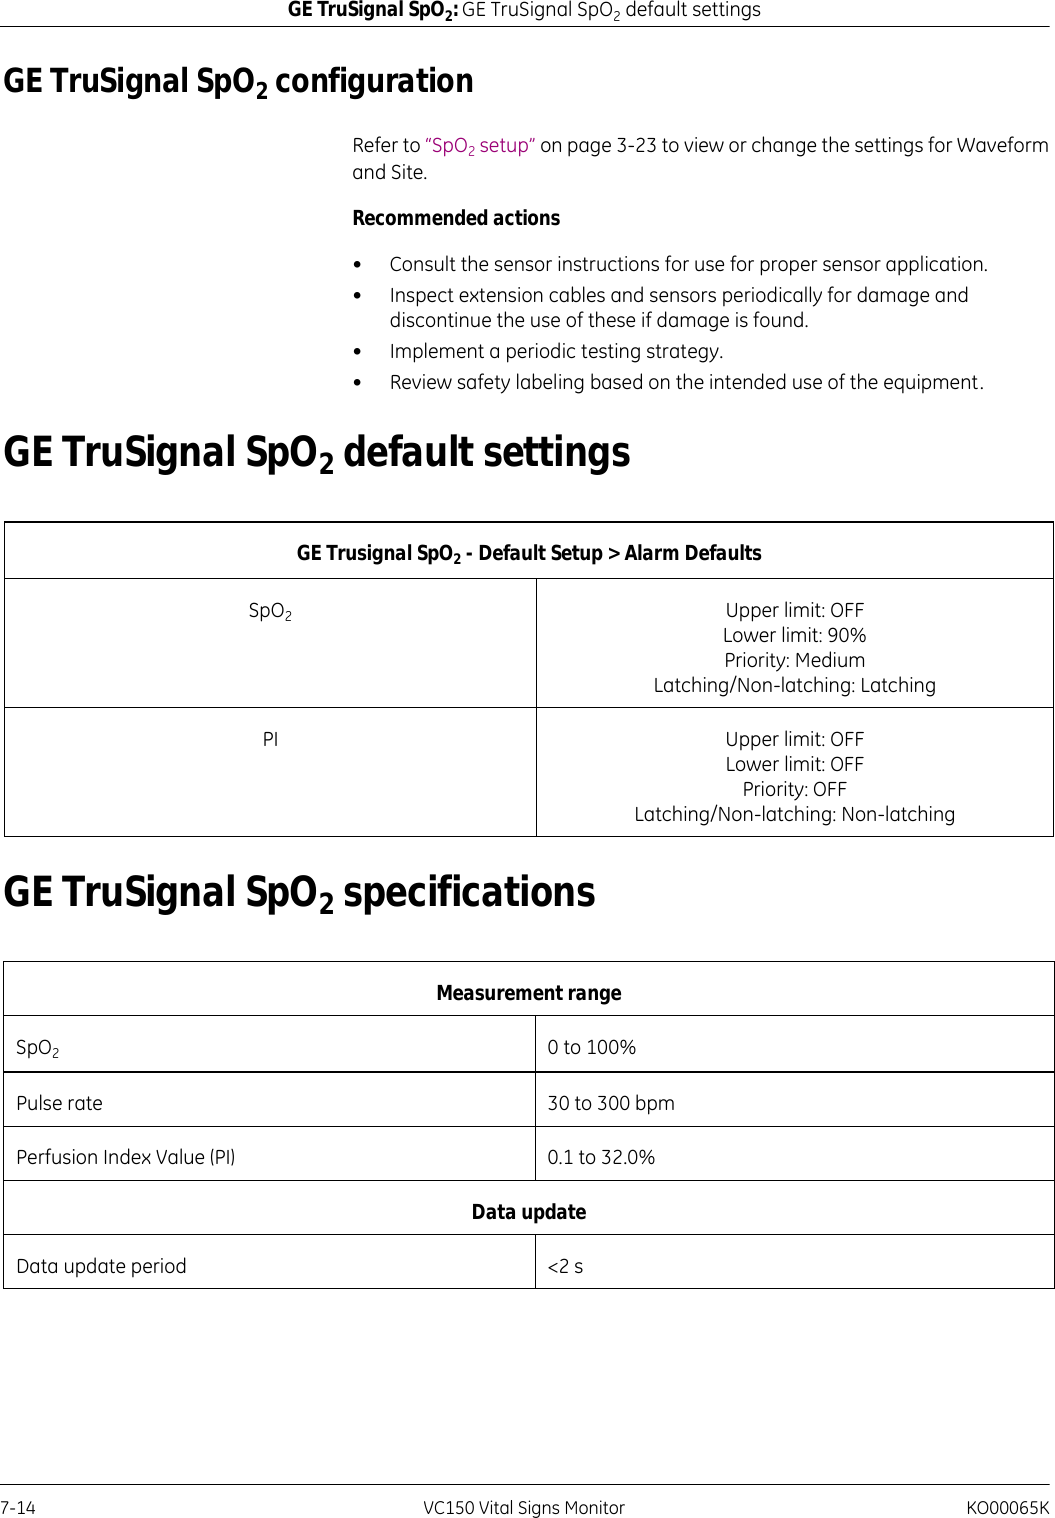 7-14 VC150 Vital Signs Monitor KO00065KGE TruSignal SpO2: GE TruSignal SpO2 default settingsGE TruSignal SpO2 configuration Refer to “SpO2 setup” on page 3-23 to view or change the settings for Waveform and Site.Recommended actions• Consult the sensor instructions for use for proper sensor application.• Inspect extension cables and sensors periodically for damage and discontinue the use of these if damage is found.• Implement a periodic testing strategy.• Review safety labeling based on the intended use of the equipment.GE TruSignal SpO2 default settingsGE TruSignal SpO2 specificationsGE Trusignal SpO2 - Default Setup &gt; Alarm DefaultsSpO2Upper limit: OFFLower limit: 90%Priority: MediumLatching/Non-latching: LatchingPI Upper limit: OFFLower limit: OFFPriority: OFFLatching/Non-latching: Non-latchingMeasurement rangeSpO20 to 100%Pulse rate 30 to 300 bpmPerfusion Index Value (PI) 0.1 to 32.0%Data update Data update period &lt;2 s